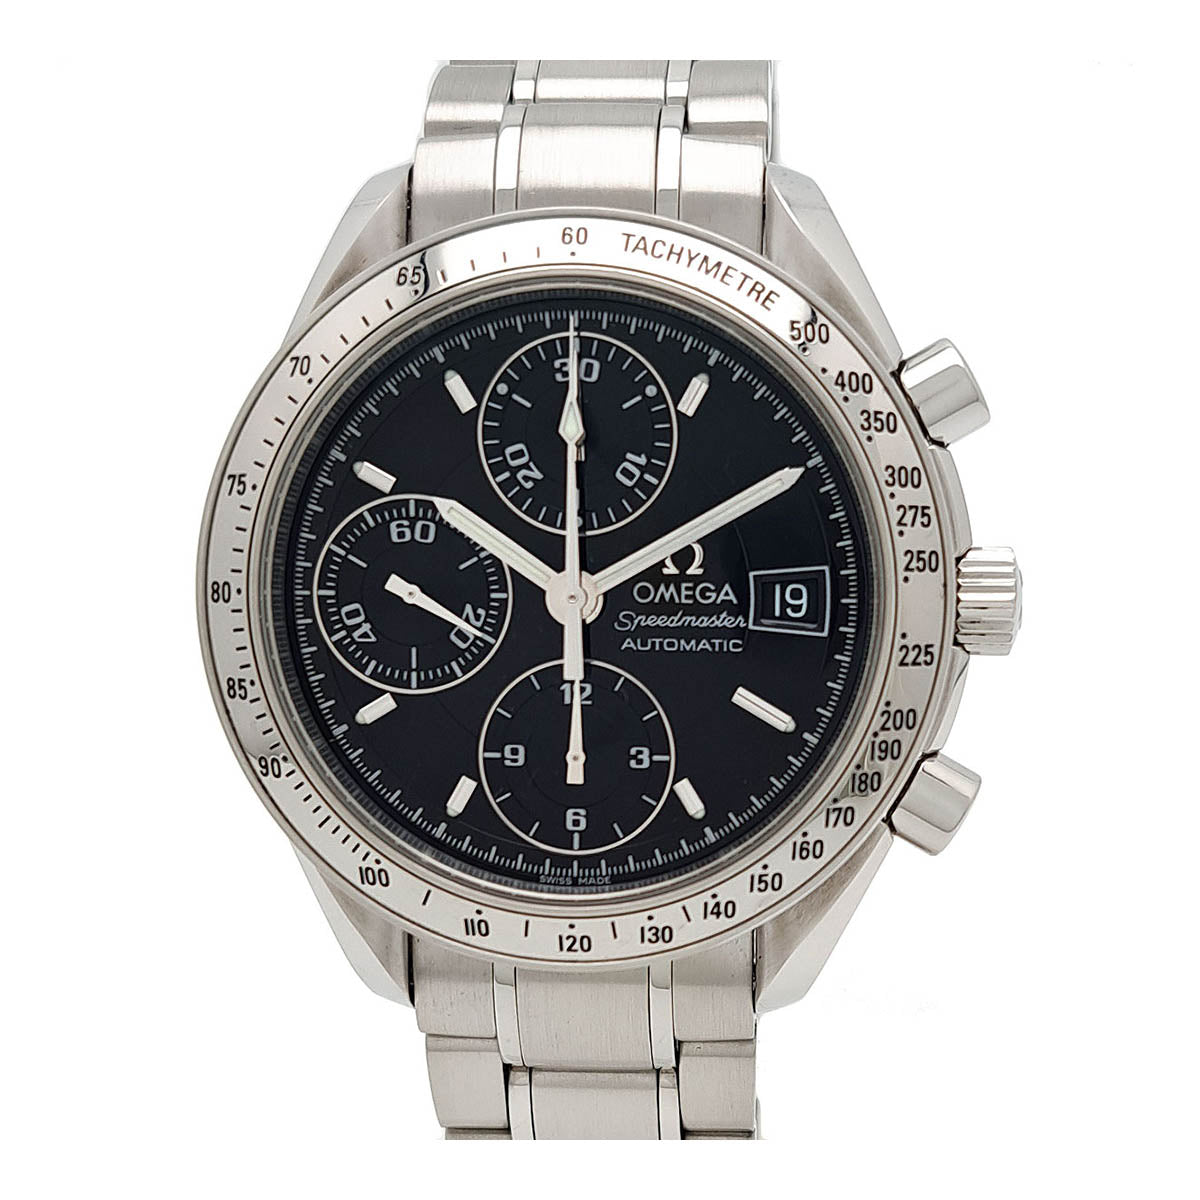 OMEGA Speedmaster Date 3513.50 Automatic Stainless Steel Men’s Pre-owned Watch 3513.5